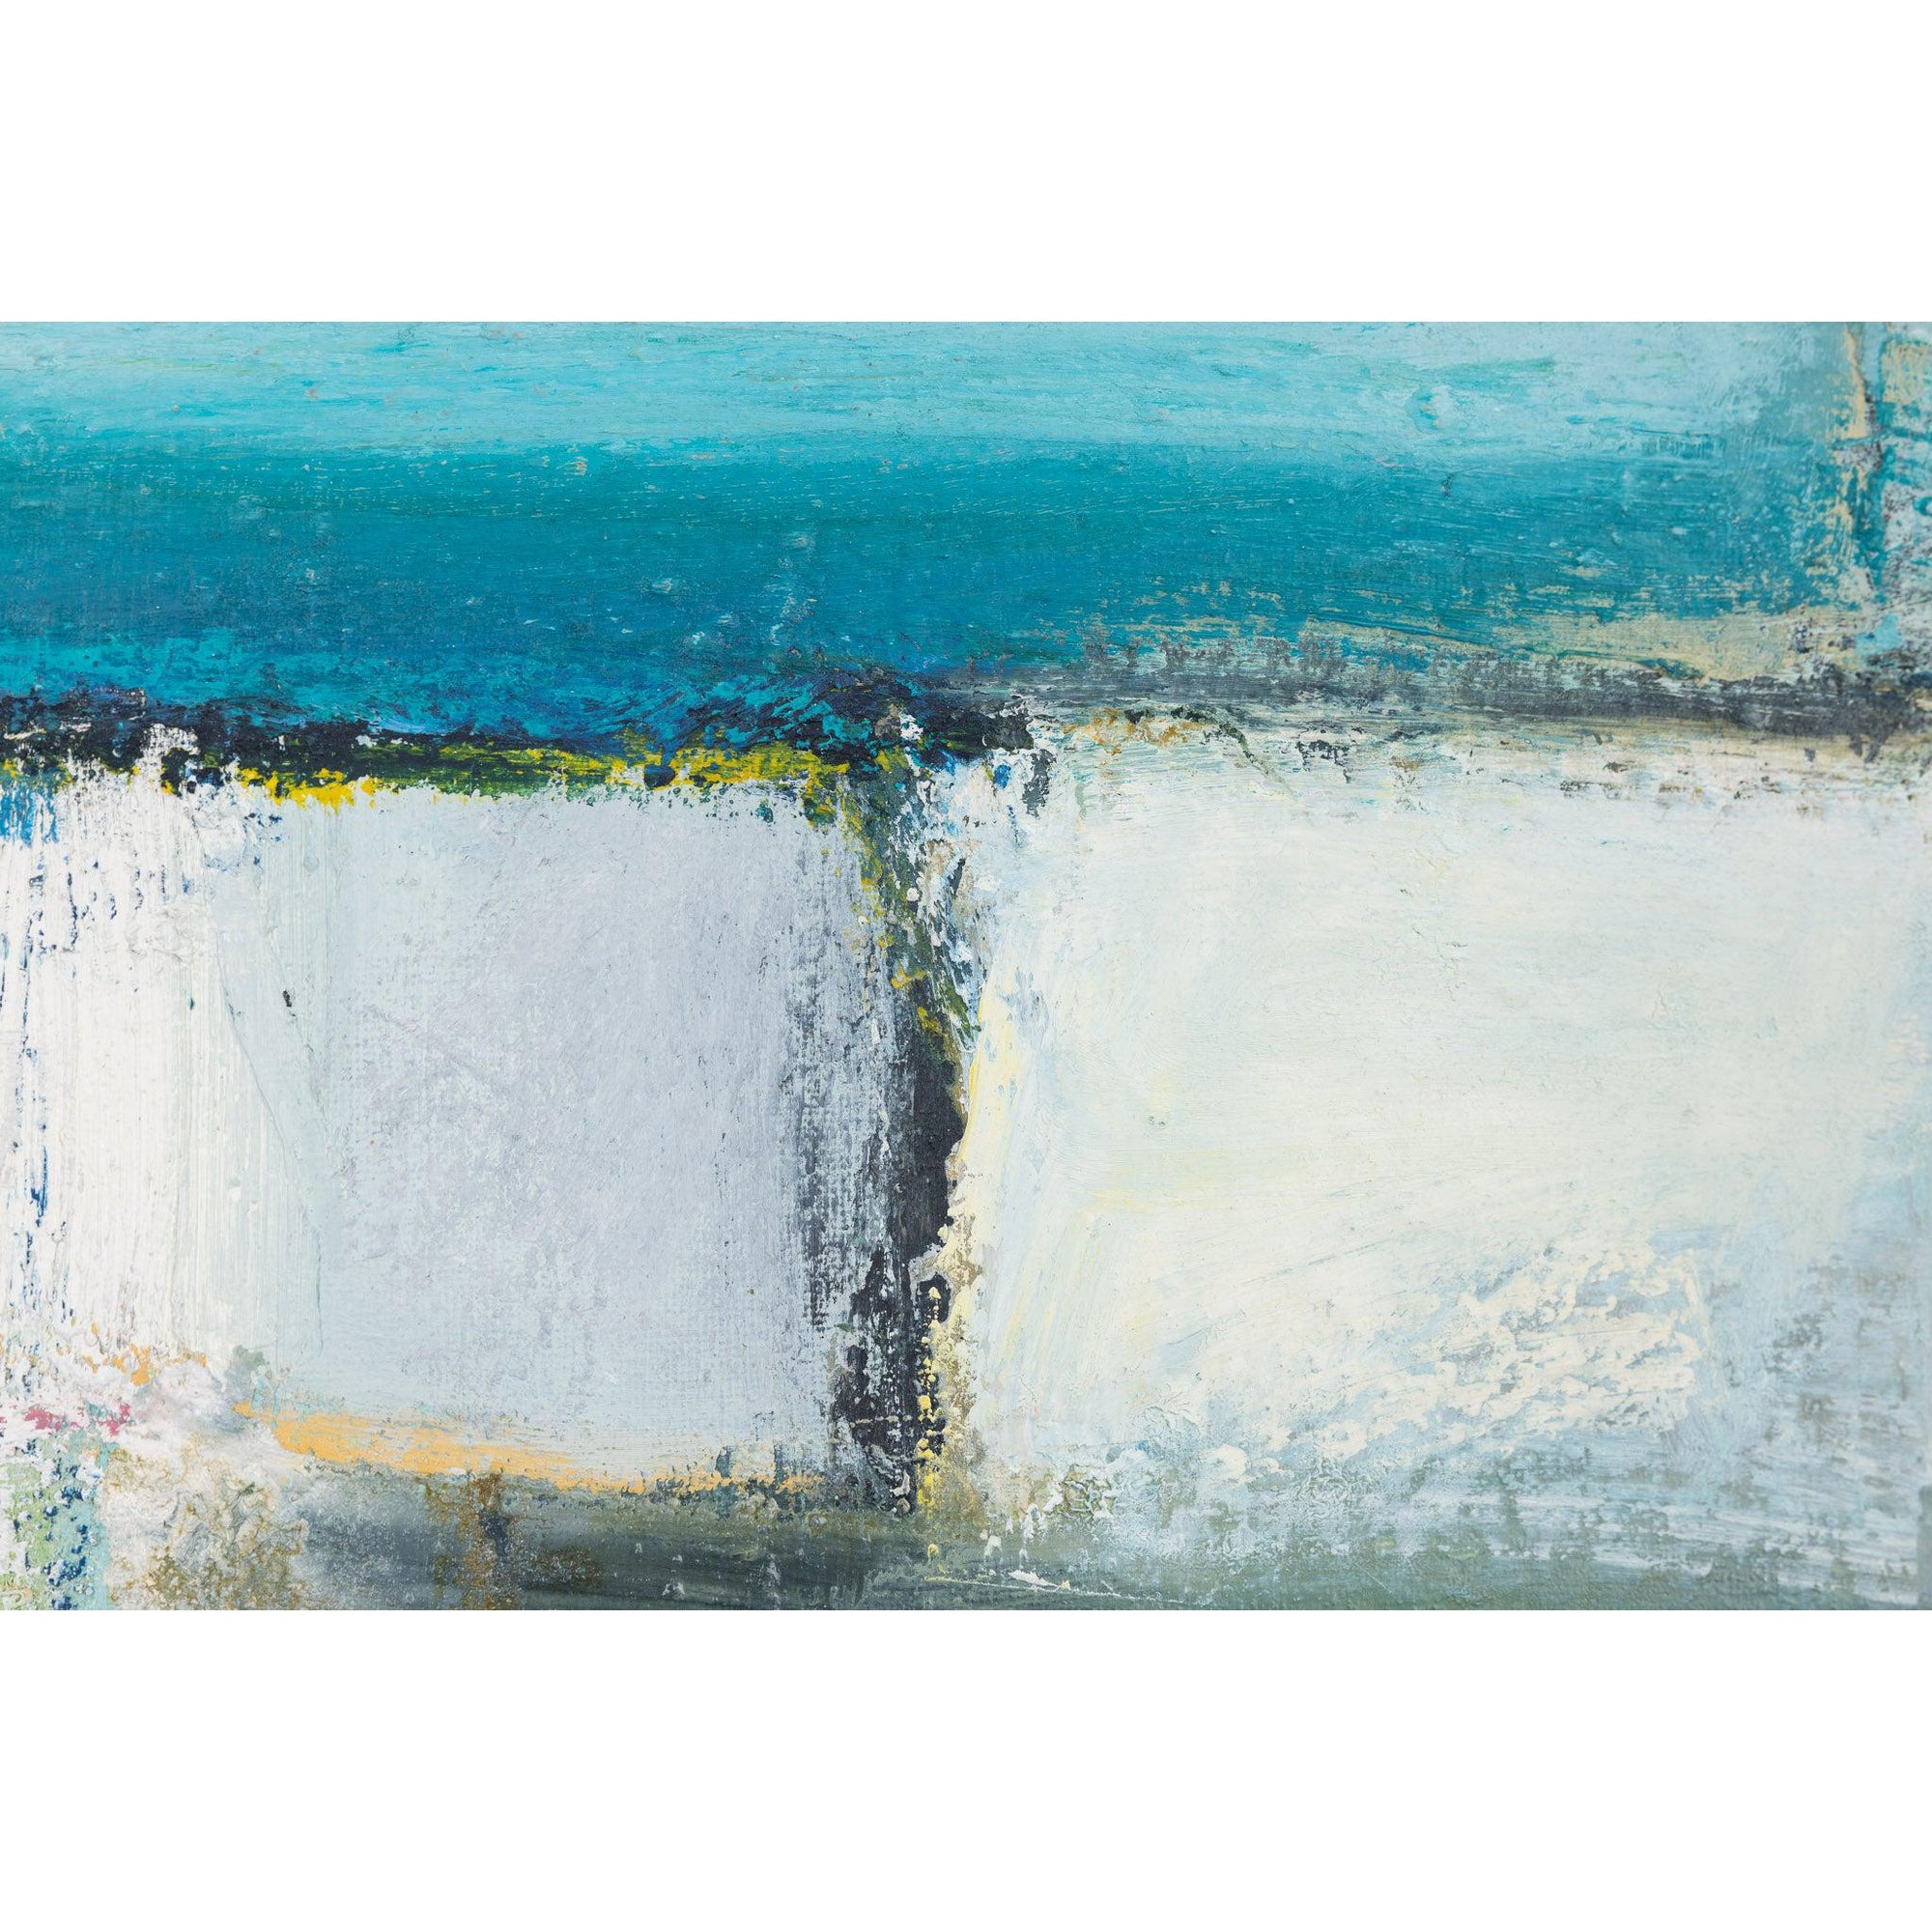 'Harbour' oil original by Justine Lois Thorpe, available at Padstow Gallery, Cornwall